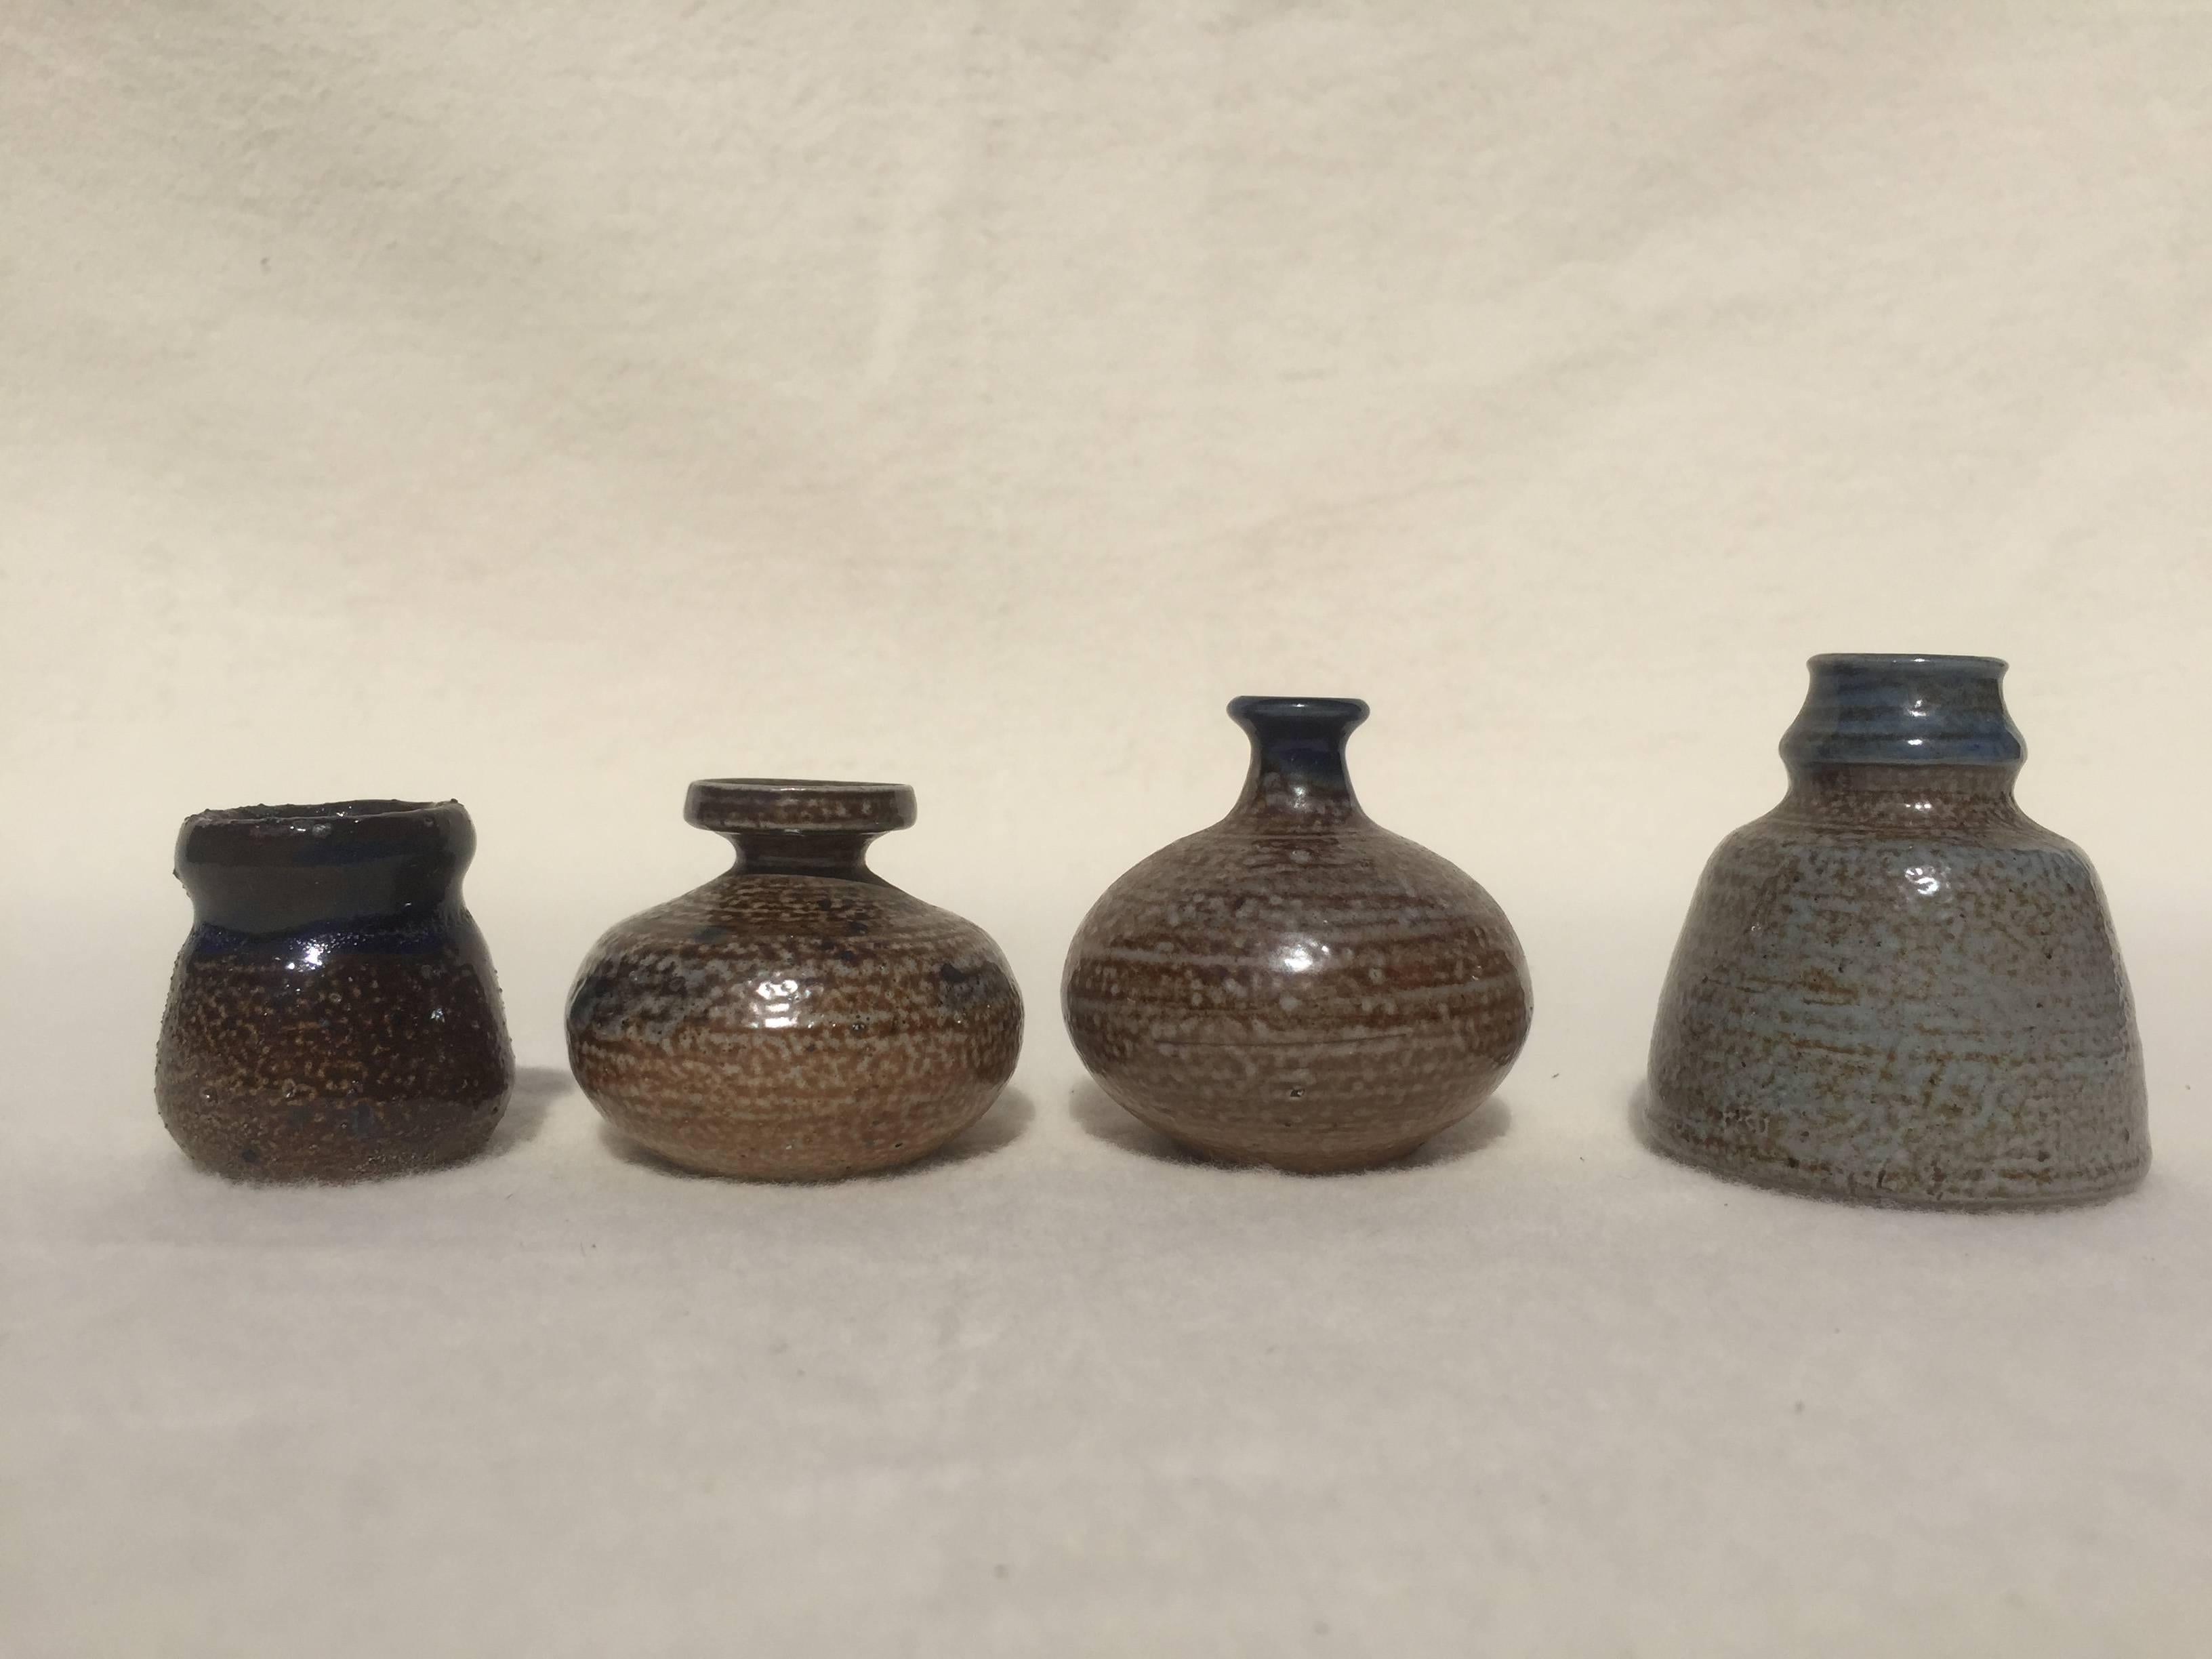 Set of four unique Miniature Art Pottery miniature vases by Lilo Grinzoff-Assenmacher, Germany, 1960s. The vases have classical shapes and are salt glazed in cream, blue, green and brown. Salt glazed ceramics is burned at very high temperatures and